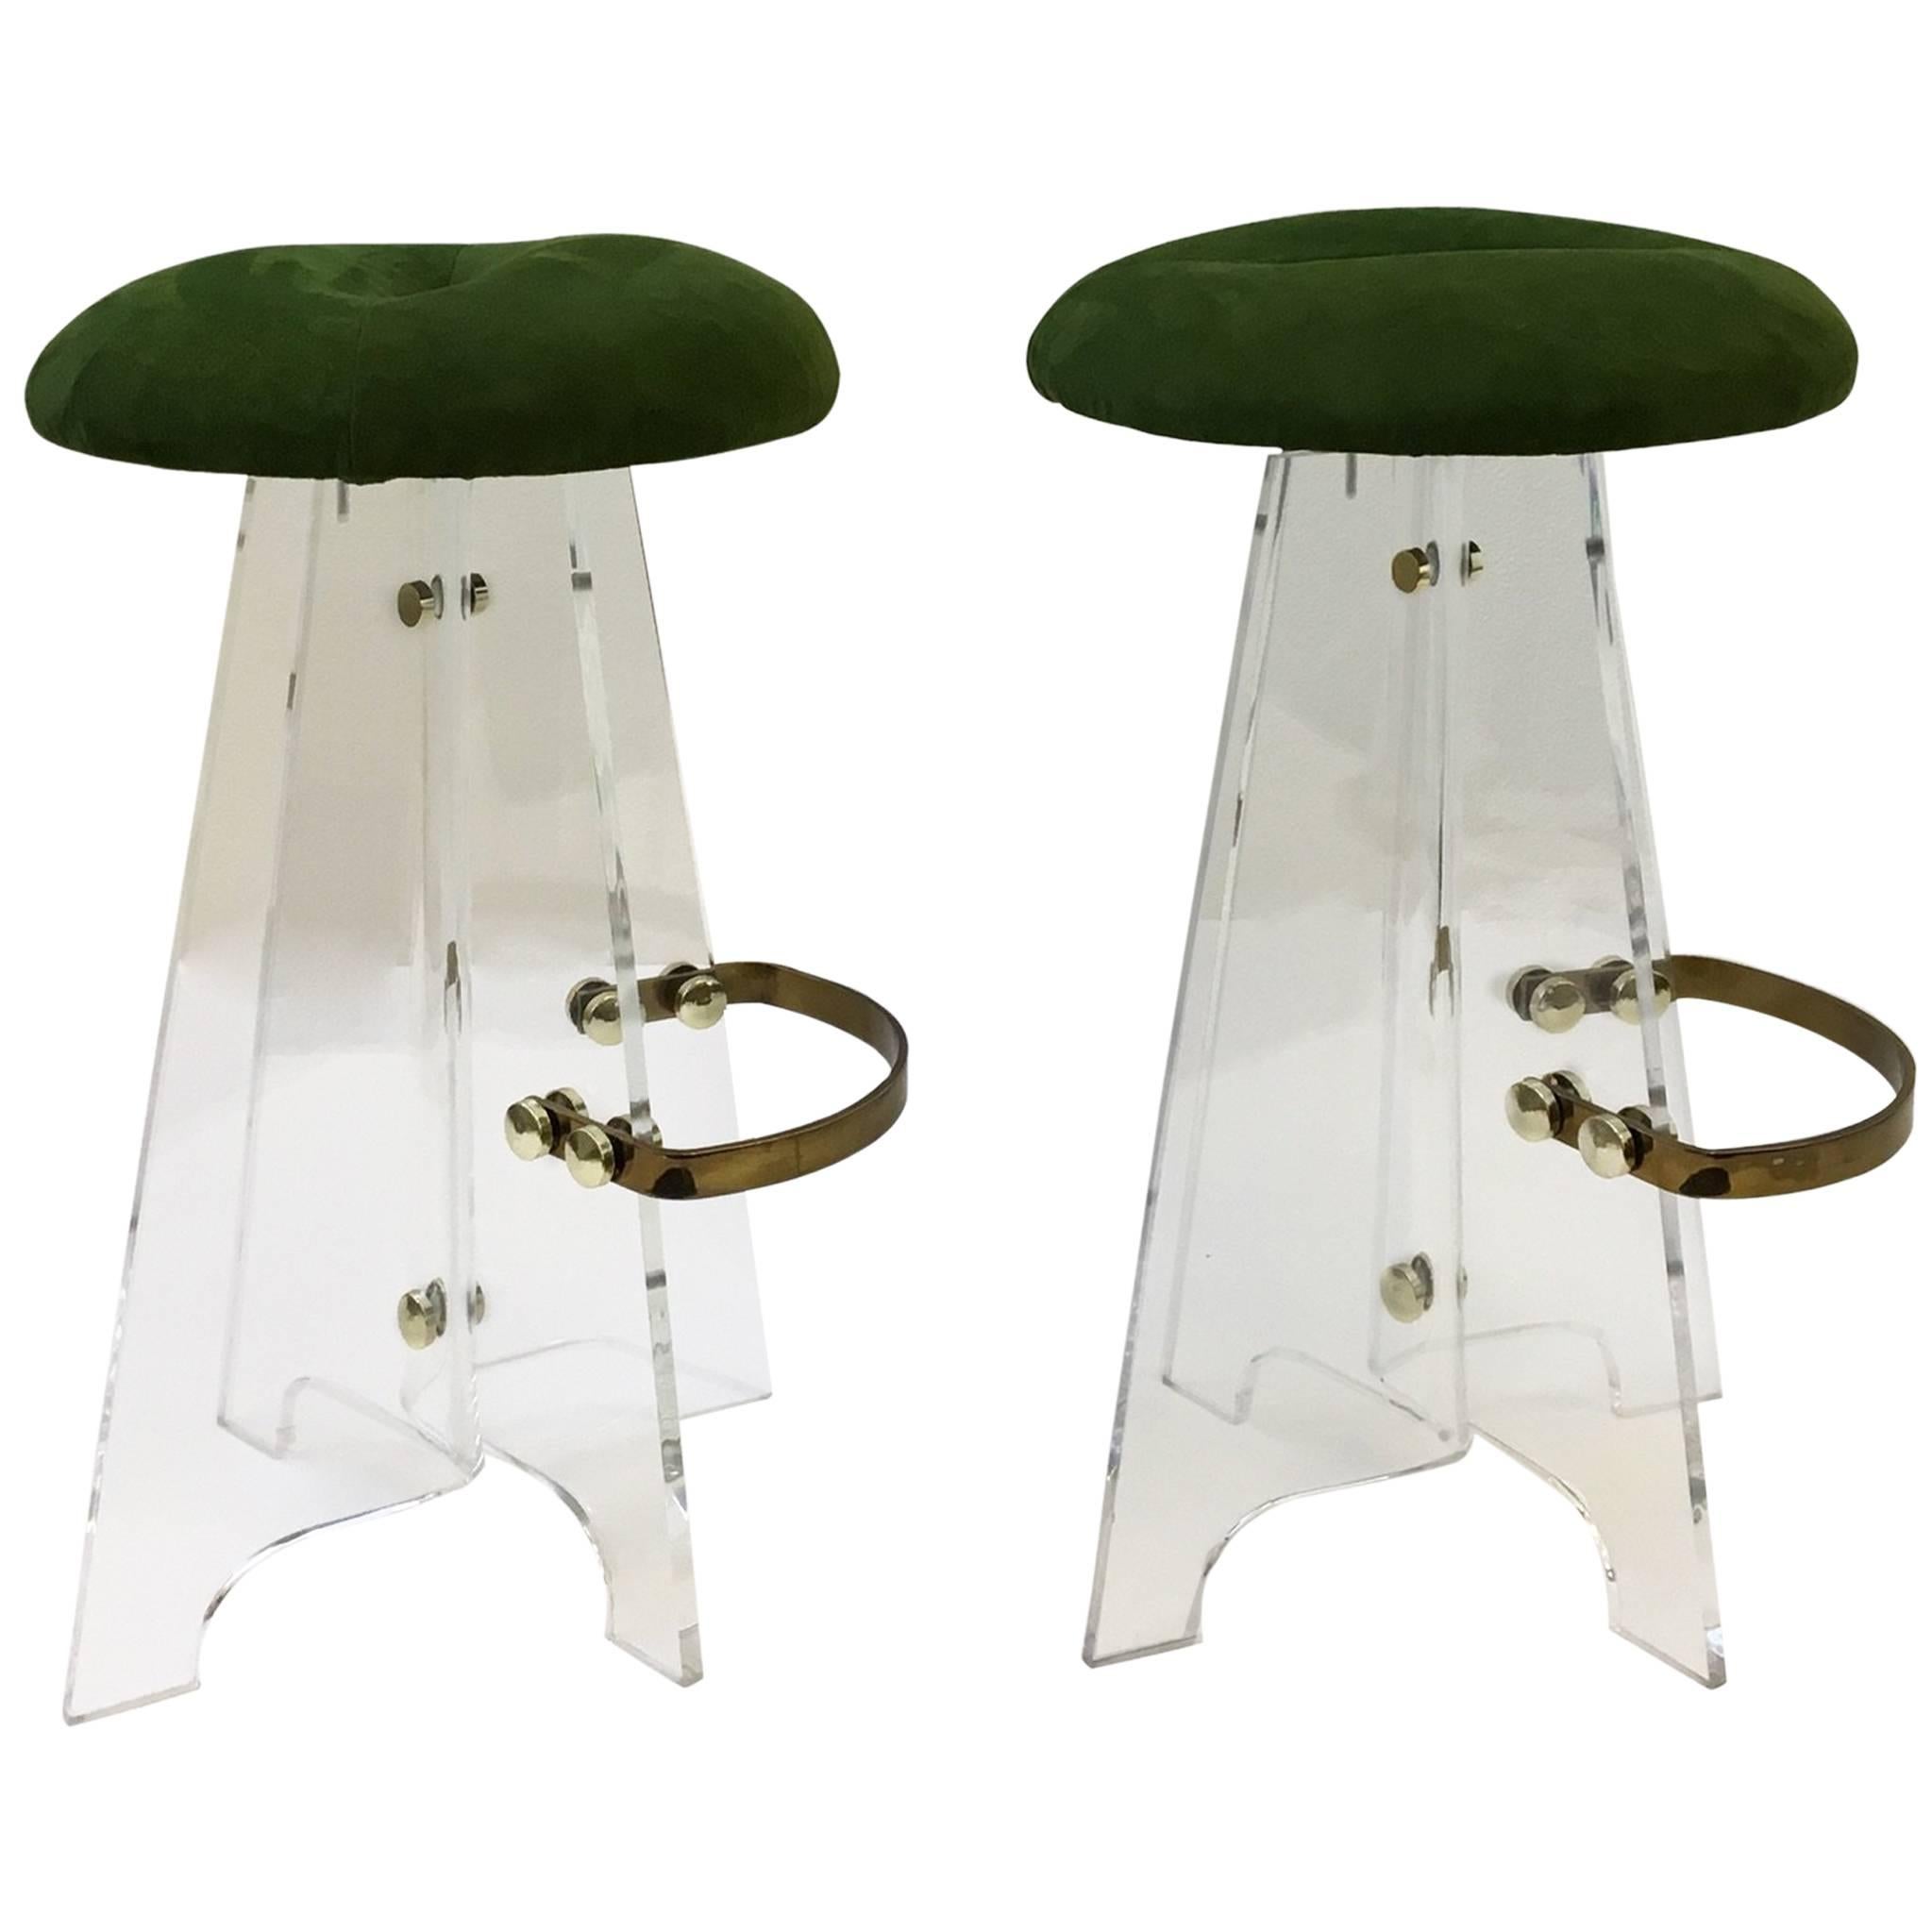 Pair of Acrylic and Suede Leather Swivel Barstools